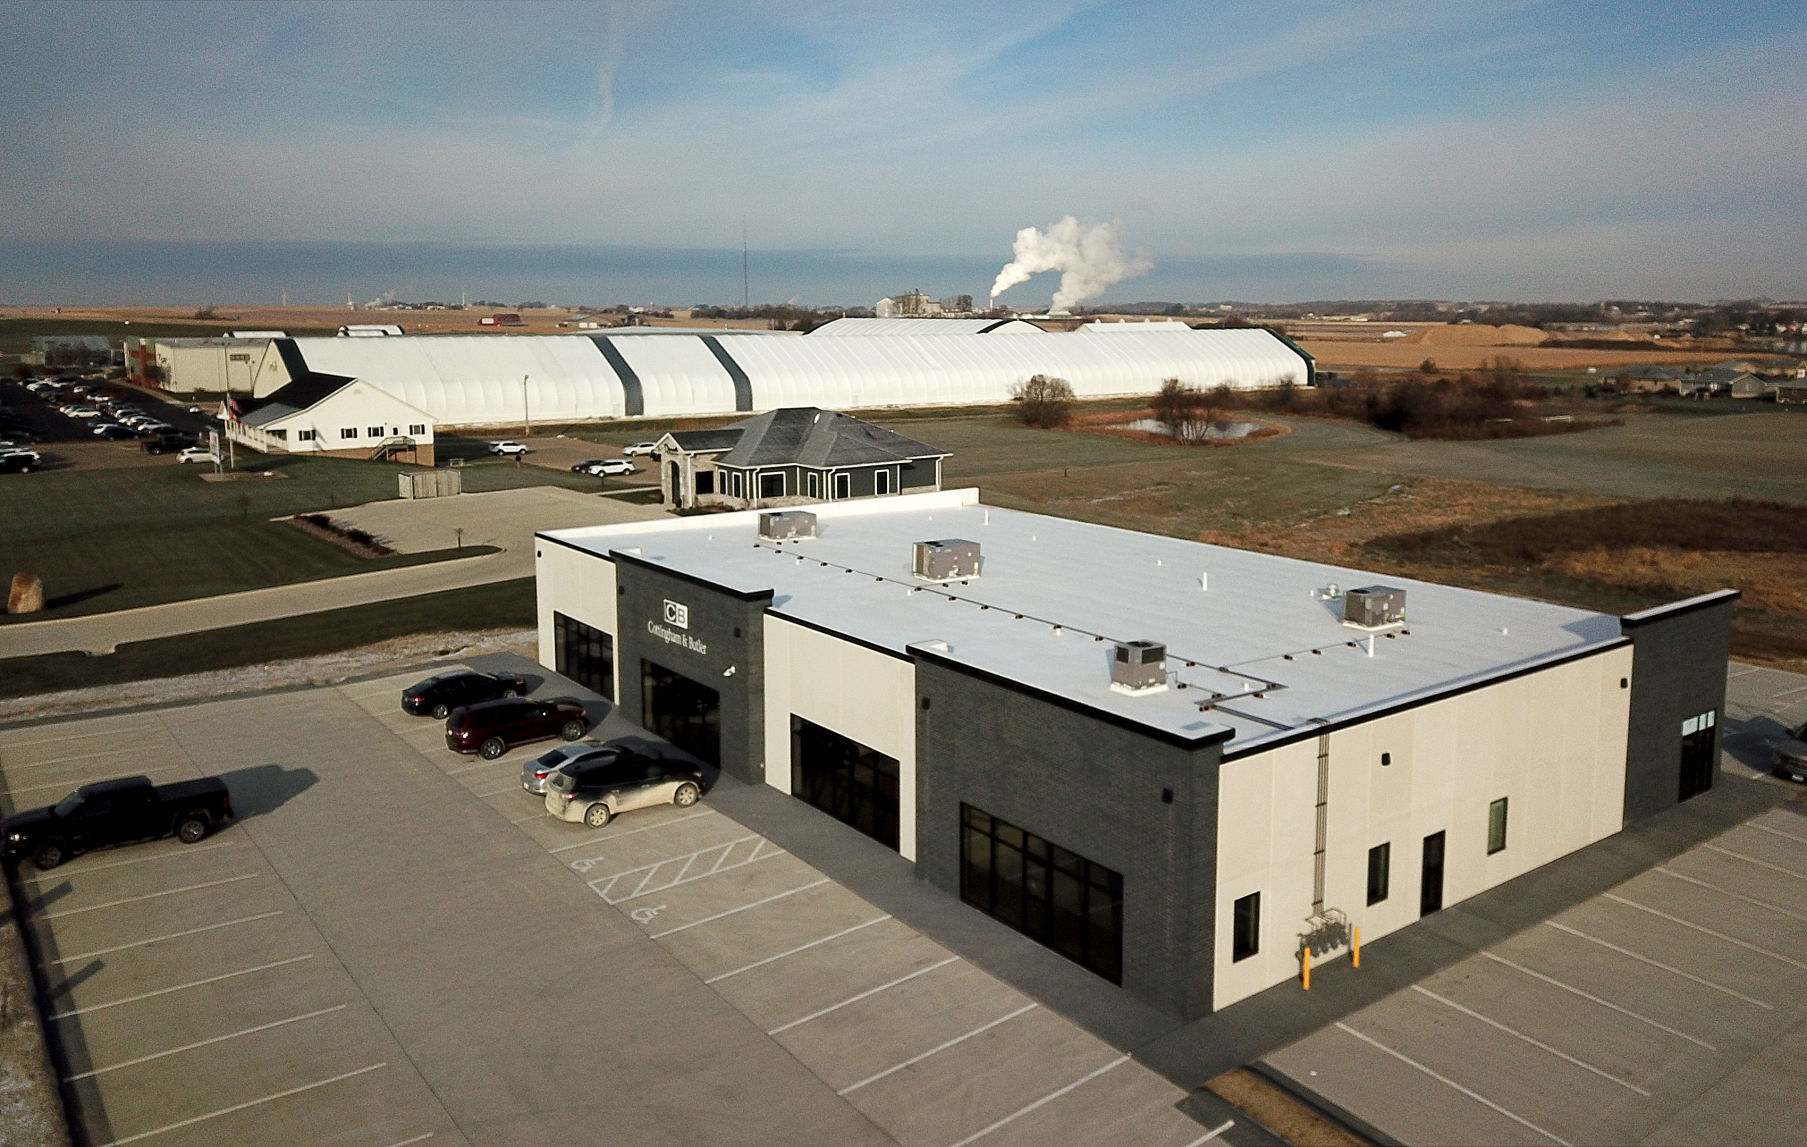 A new professional building is located at 980 Field of Dreams Way in Dyersville, Iowa. Two additional tenants are expected to join Cottingham & Butler, which already has six employees working there. PHOTO CREDIT: JESSICA REILLY